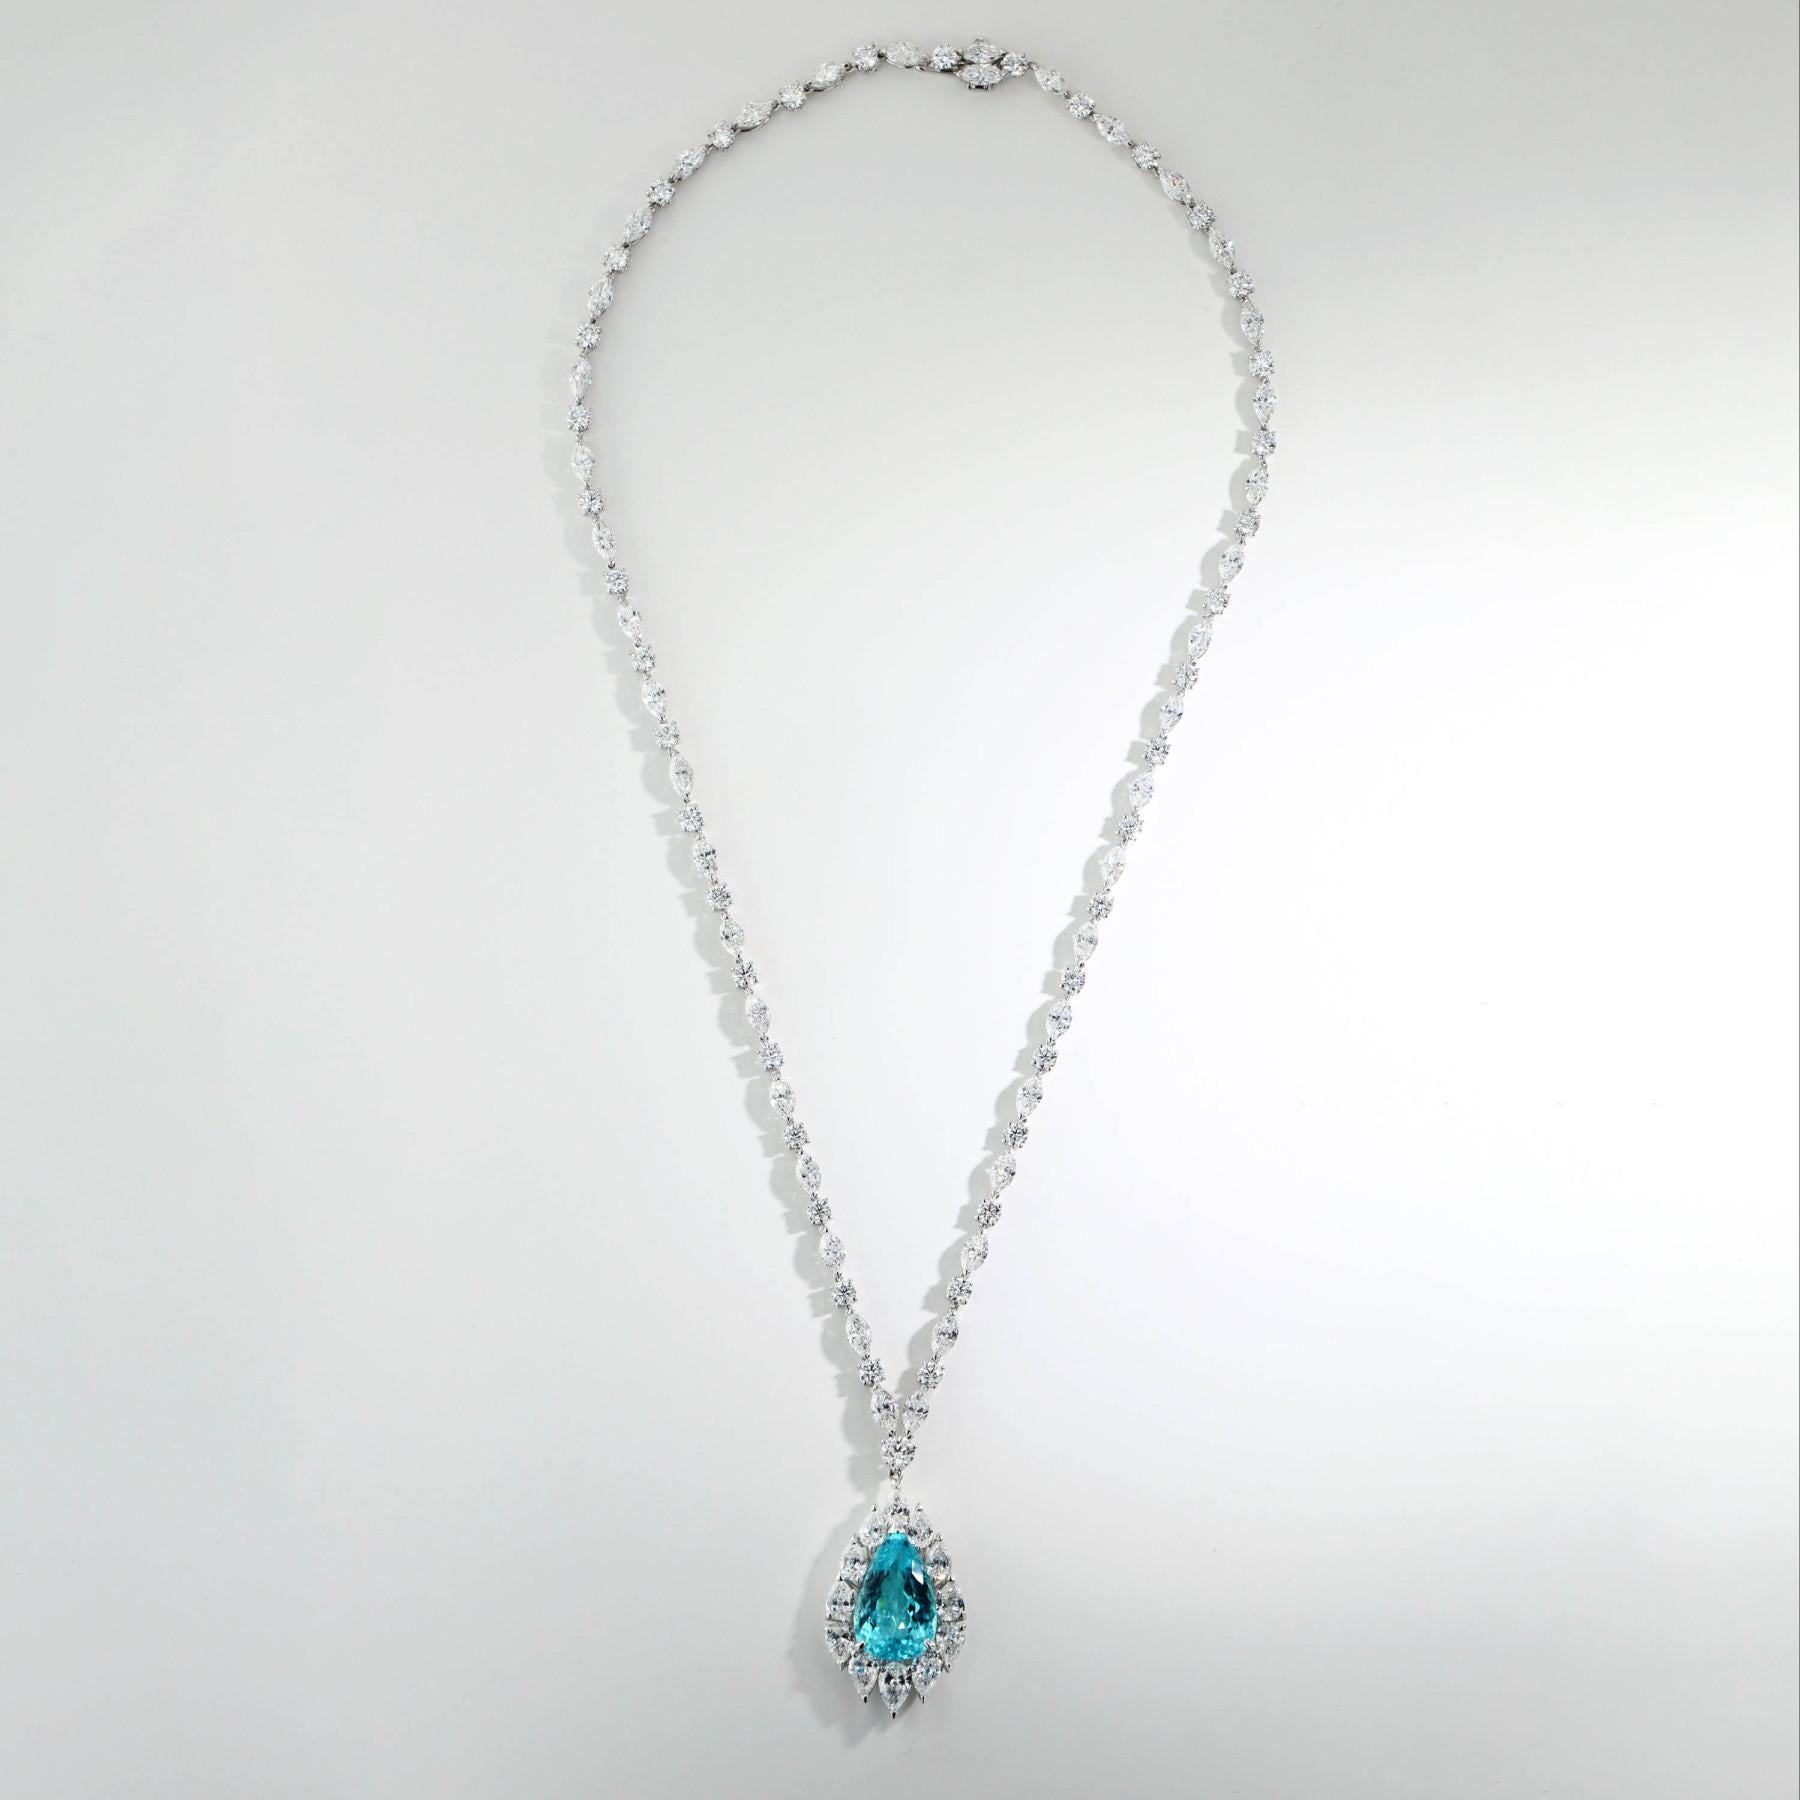 7.81cw pear shape paraiba tourmaline gemstone set into an 18k white gold necklace with marquise and round diamonds. This necklace showcases the rare and exquisite beauty of the paraiba tourmaline. The paraiba tourmaline is a type of gemstone that